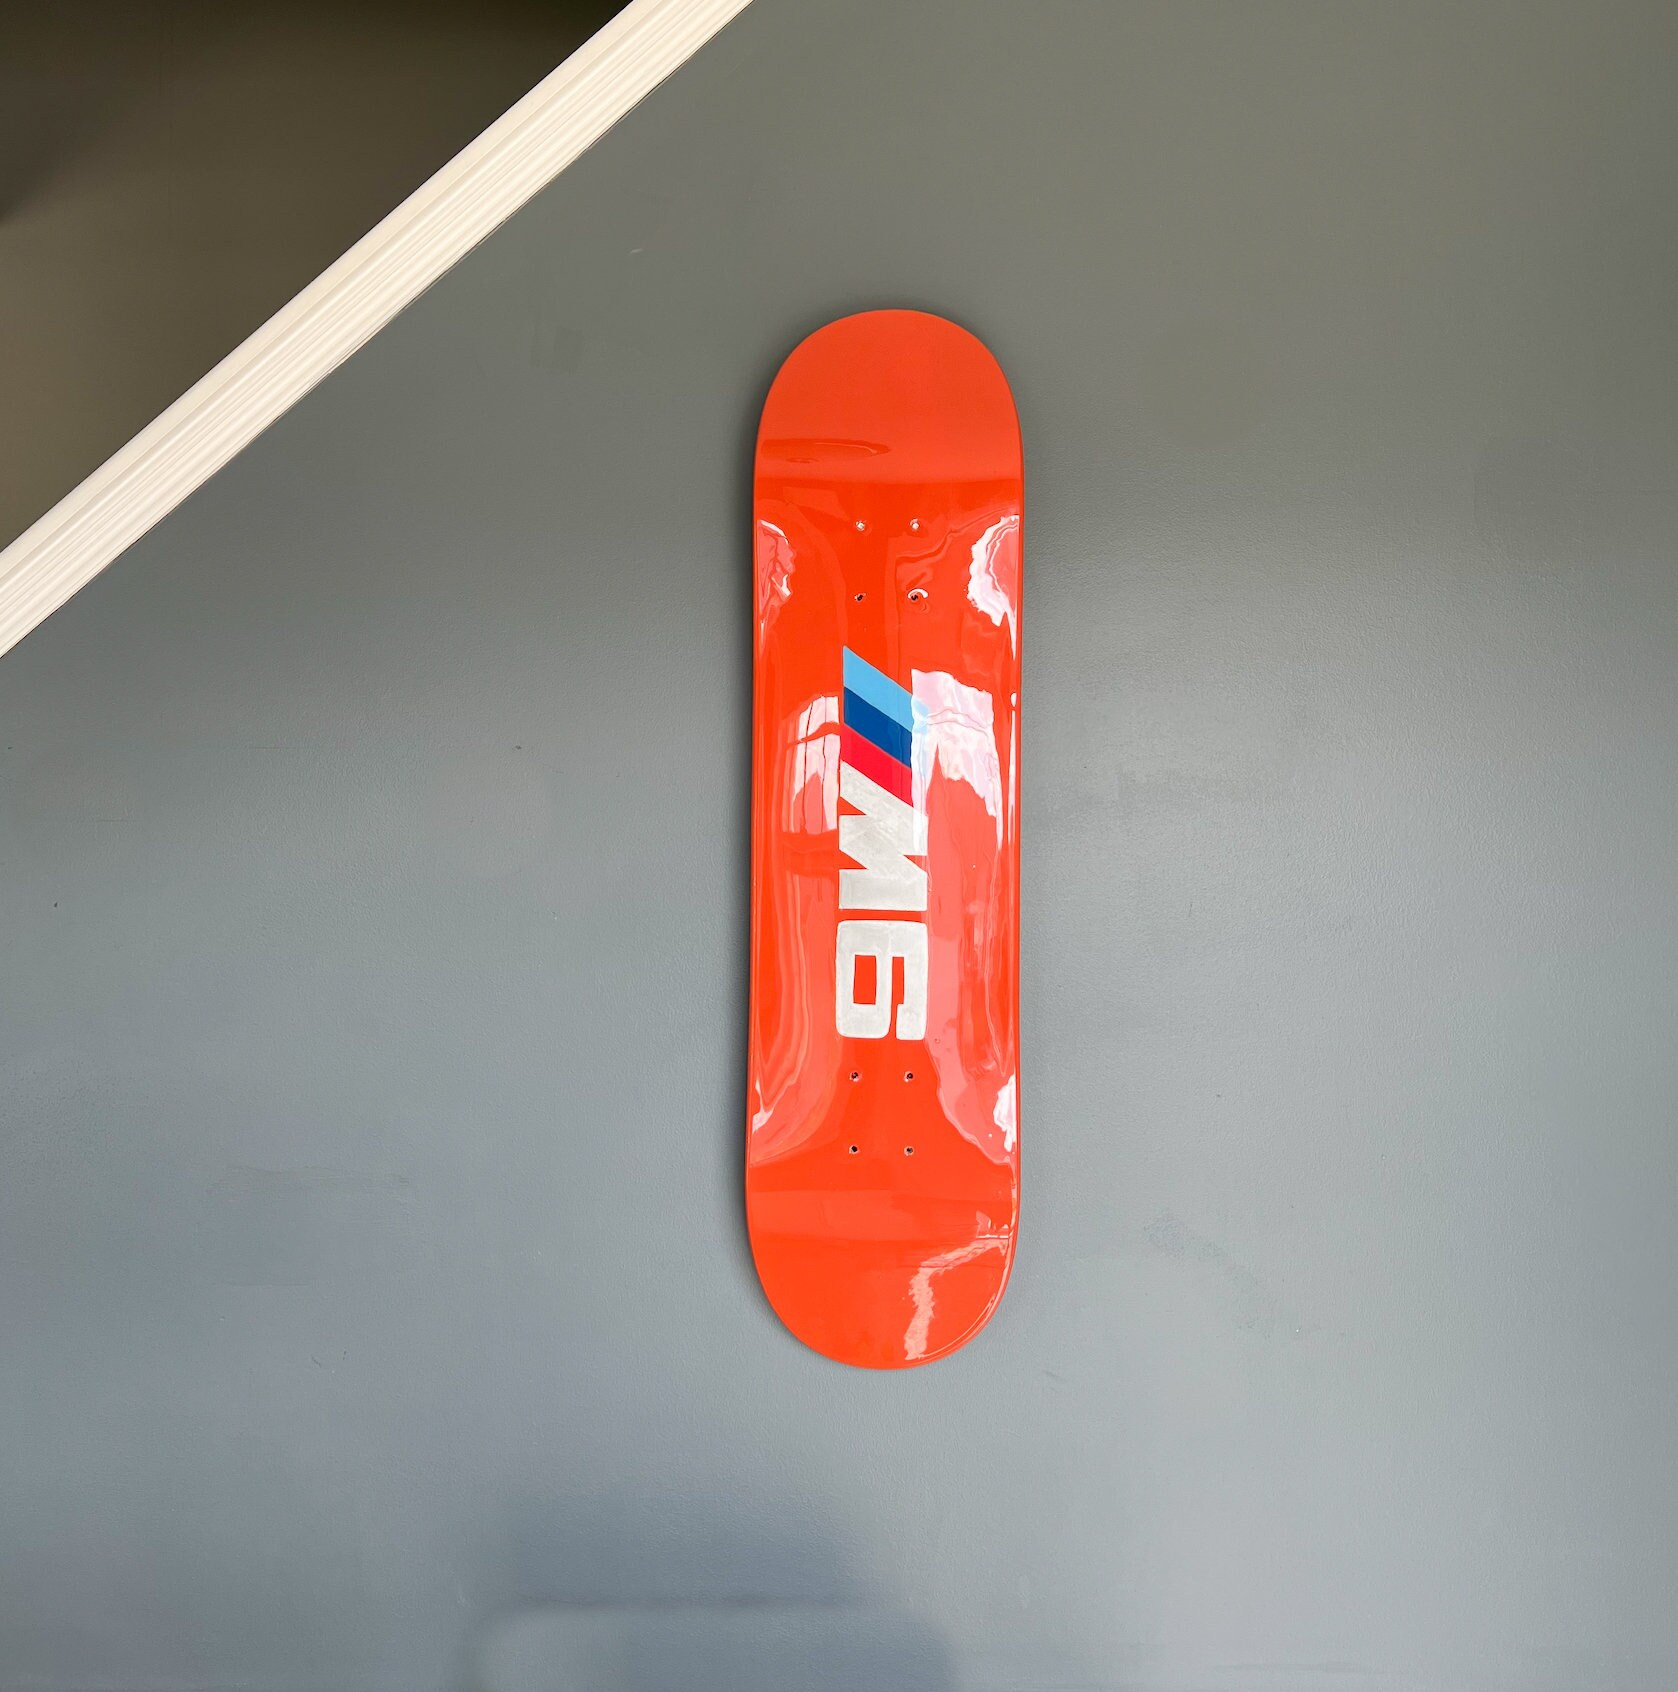 BMW E90 M3 Red Skateboard Deck art for decoration and display